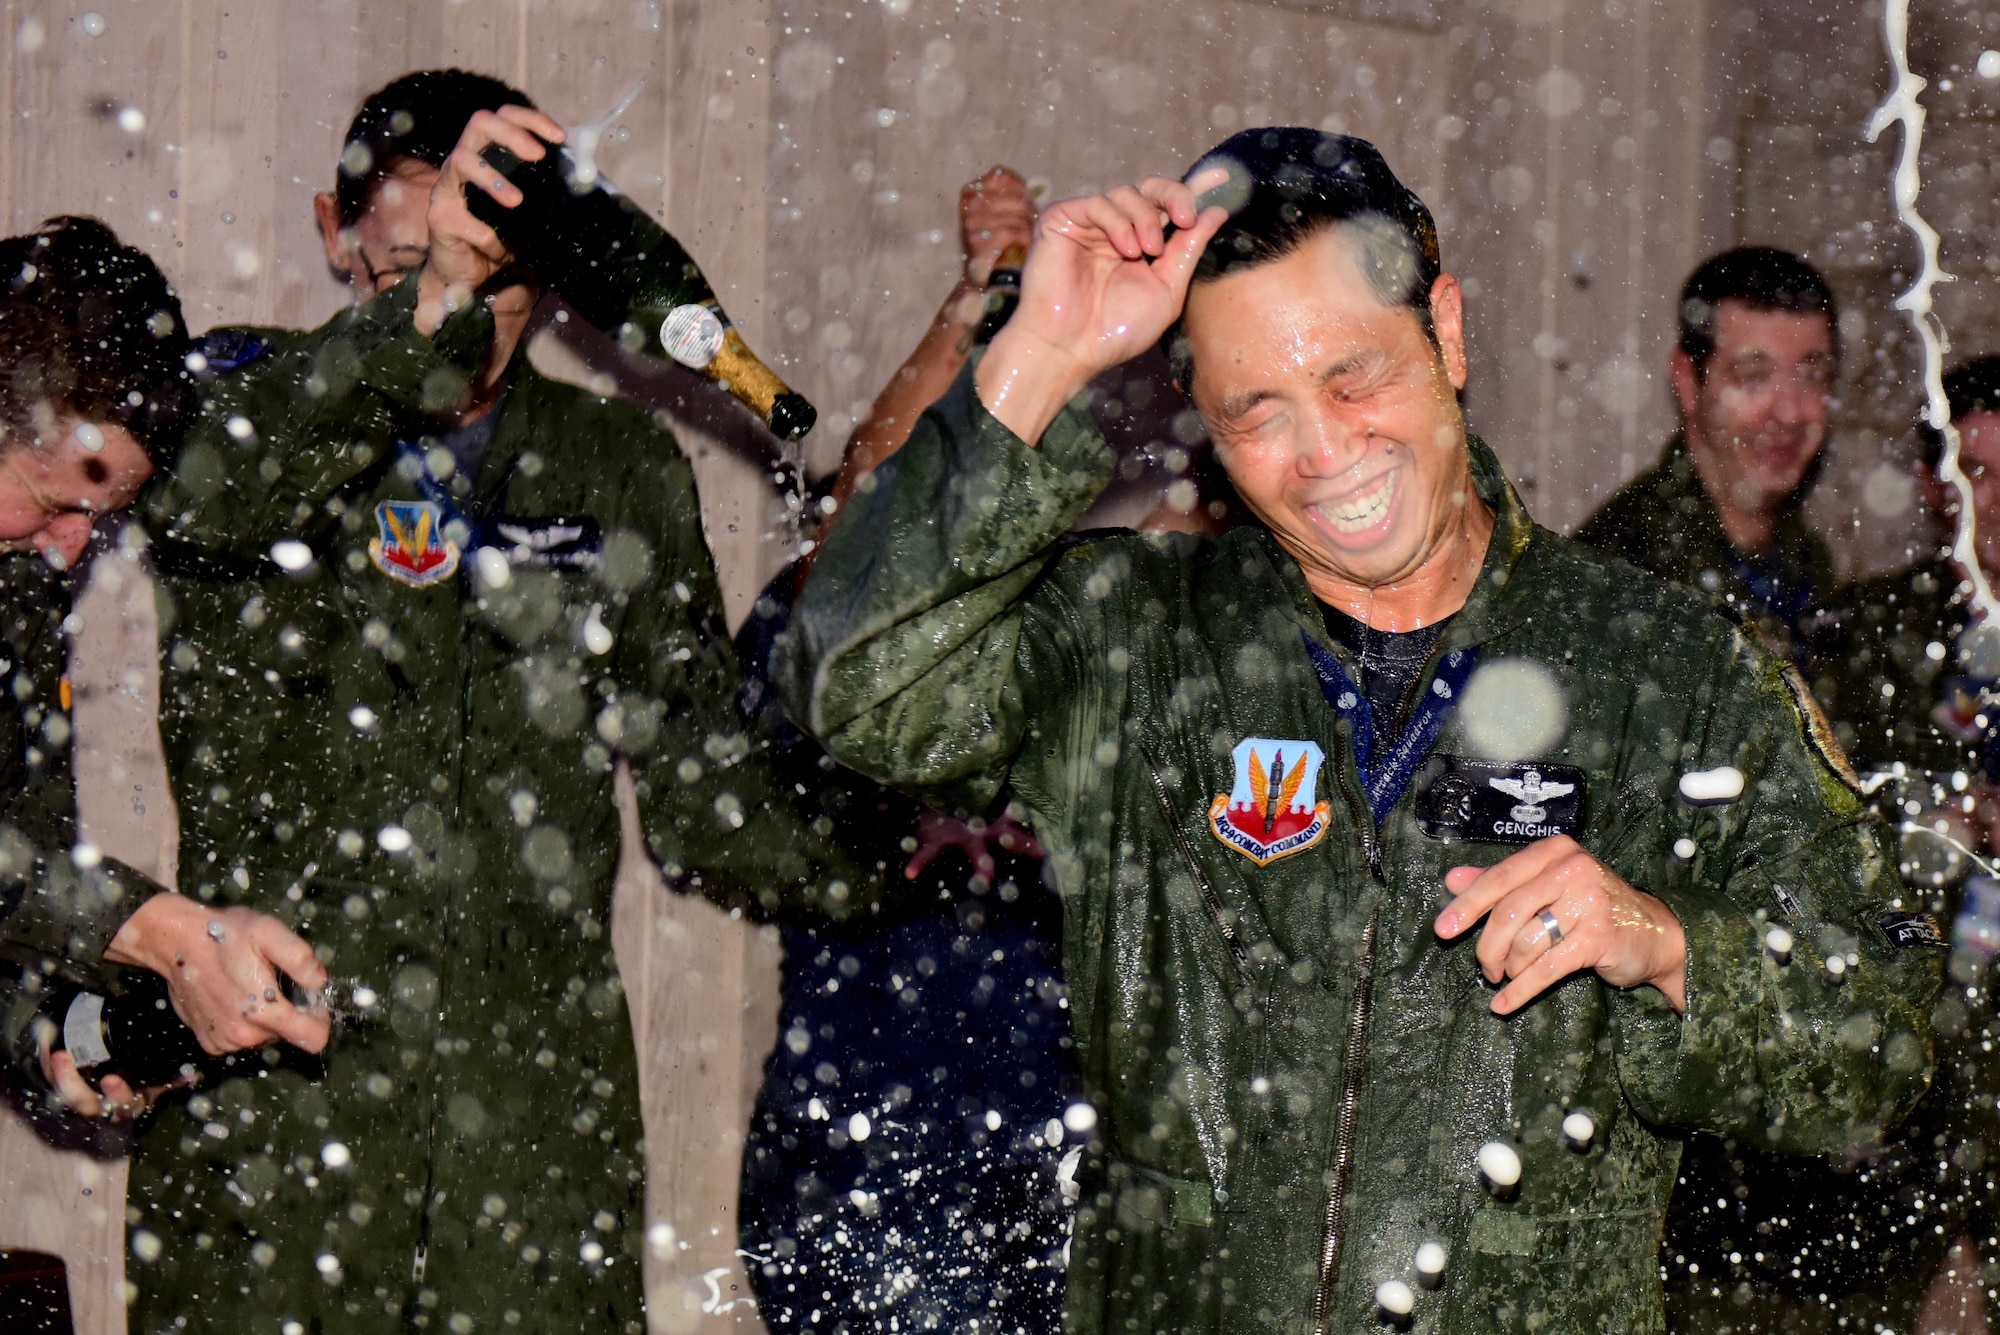 Lt. Col. Landon Quan is showered with champagne.